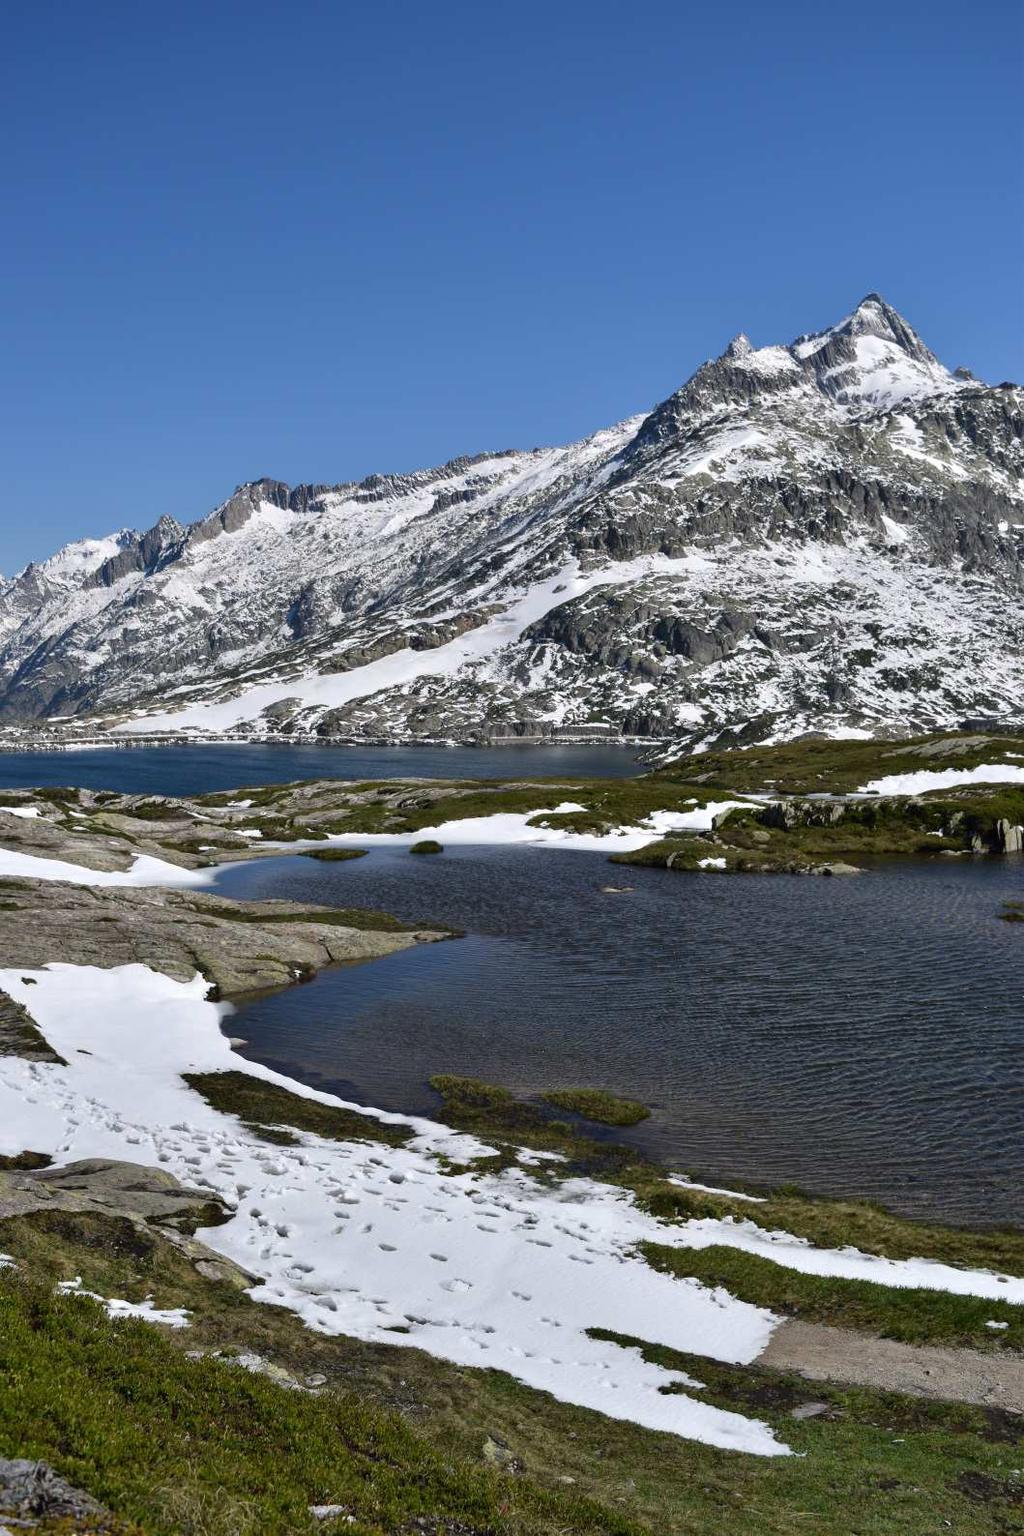 Depending on the conditions, one or more halts are possible and this is the opportunity to do some alpine botany on siliceous substrate, in the